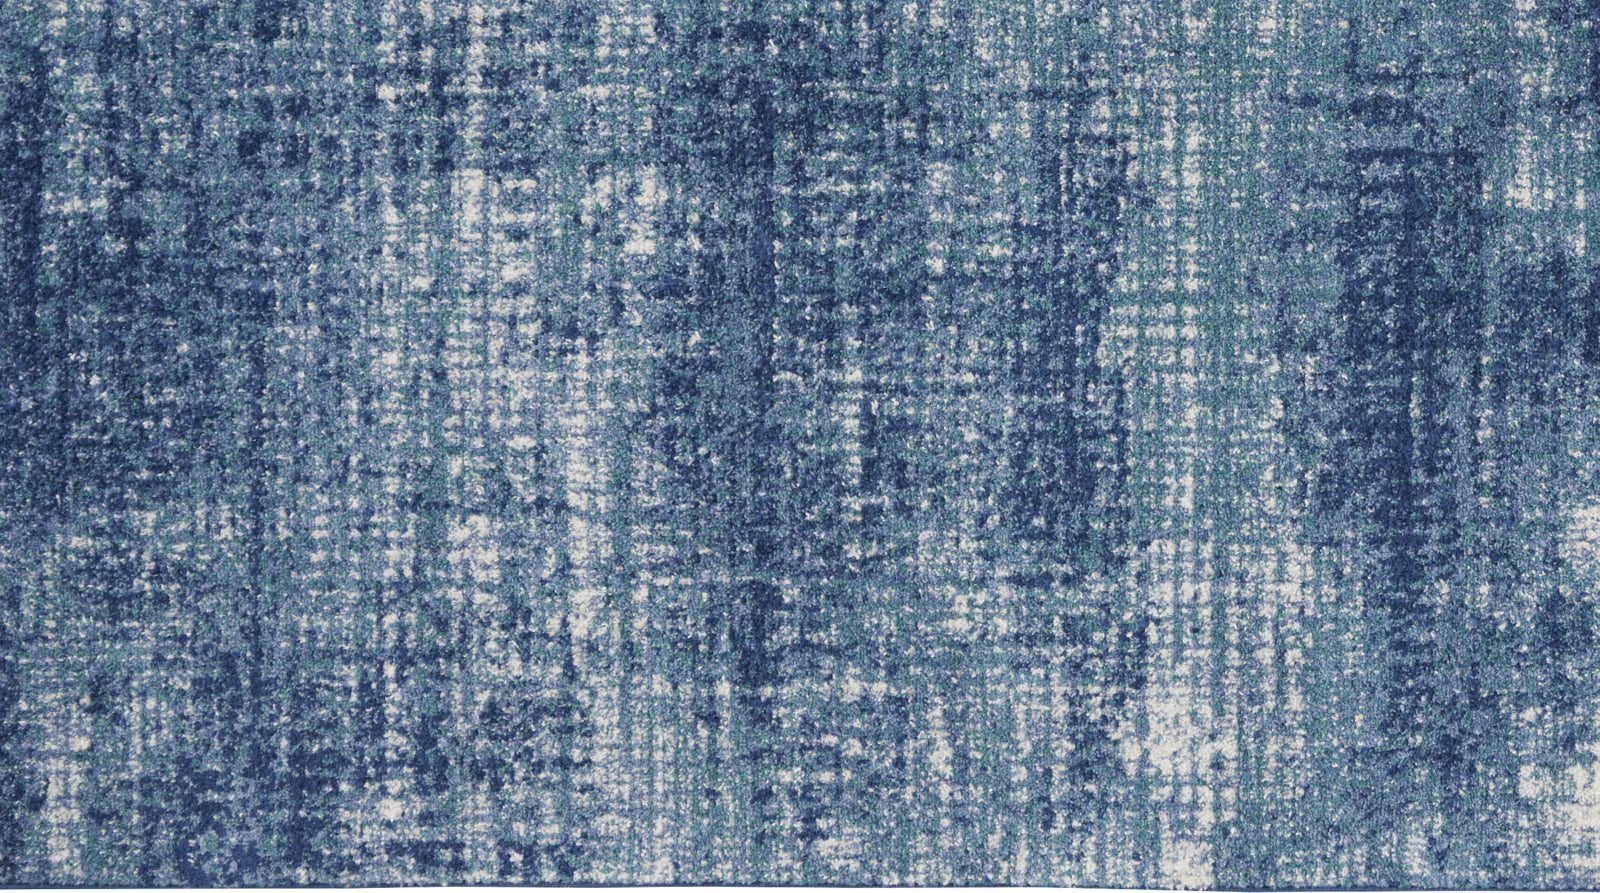 Incredible CK001 – Blue and Calvin Rugs Klein Area River Rug RFV02 Teal/Ivory Flow Decor